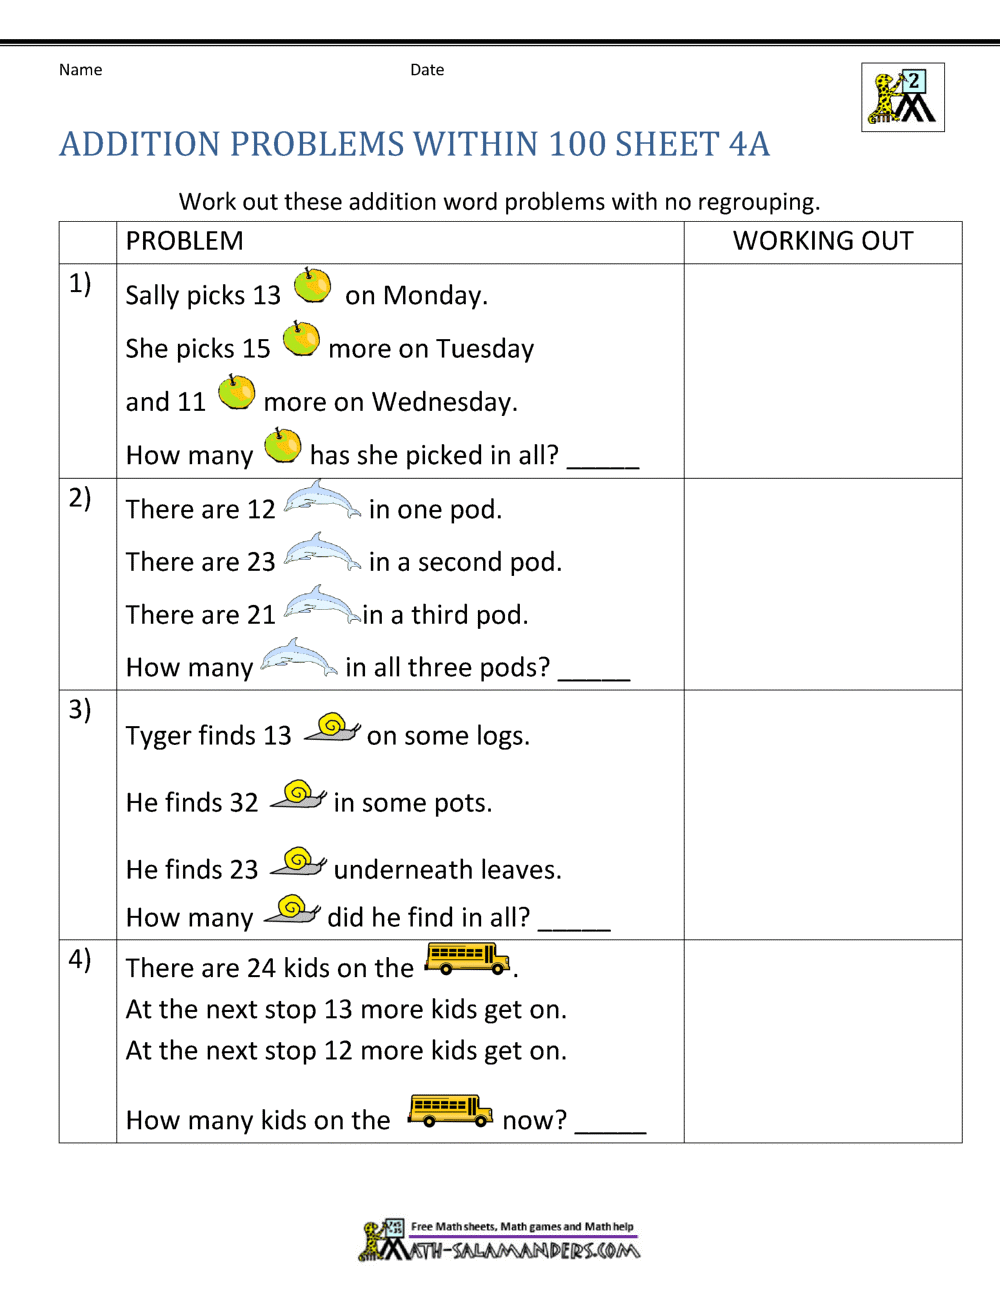 problem solving example addition